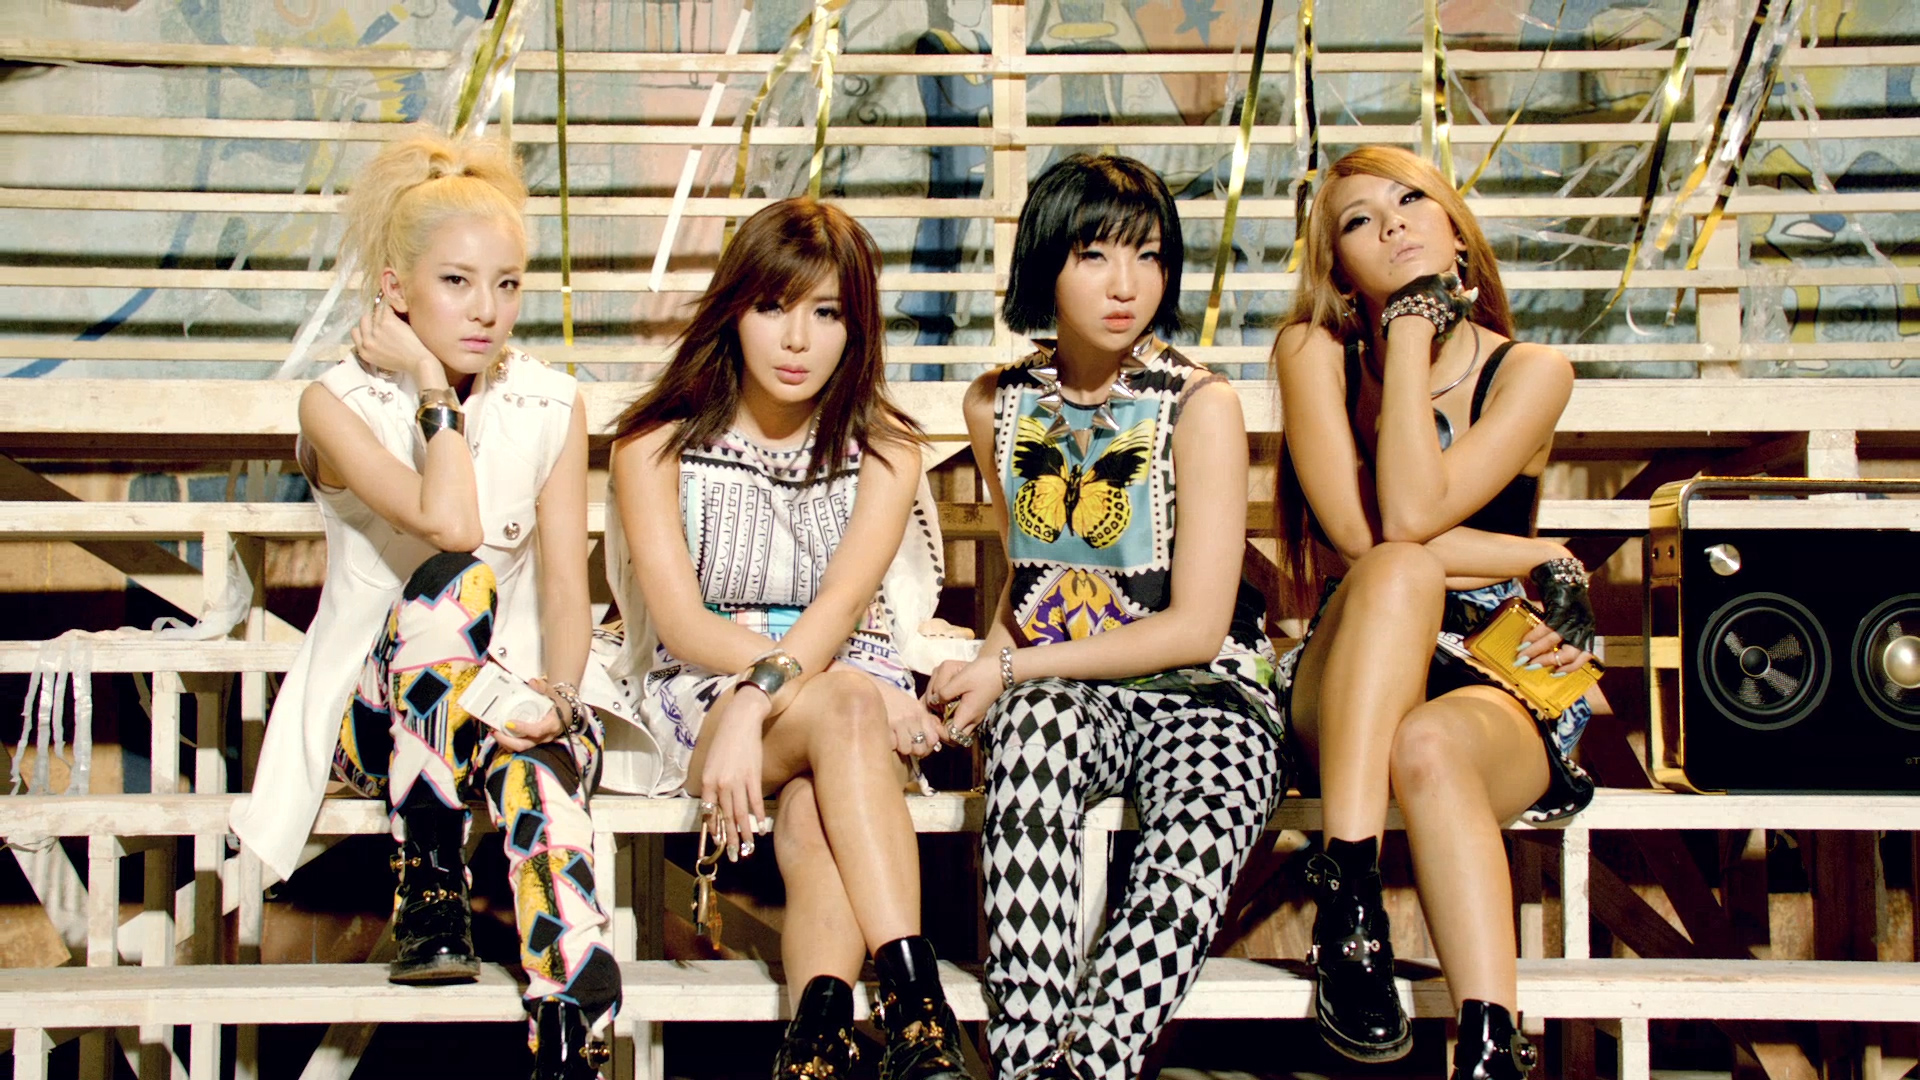 News 2ne1 Scores An All Kill With Falling In Love